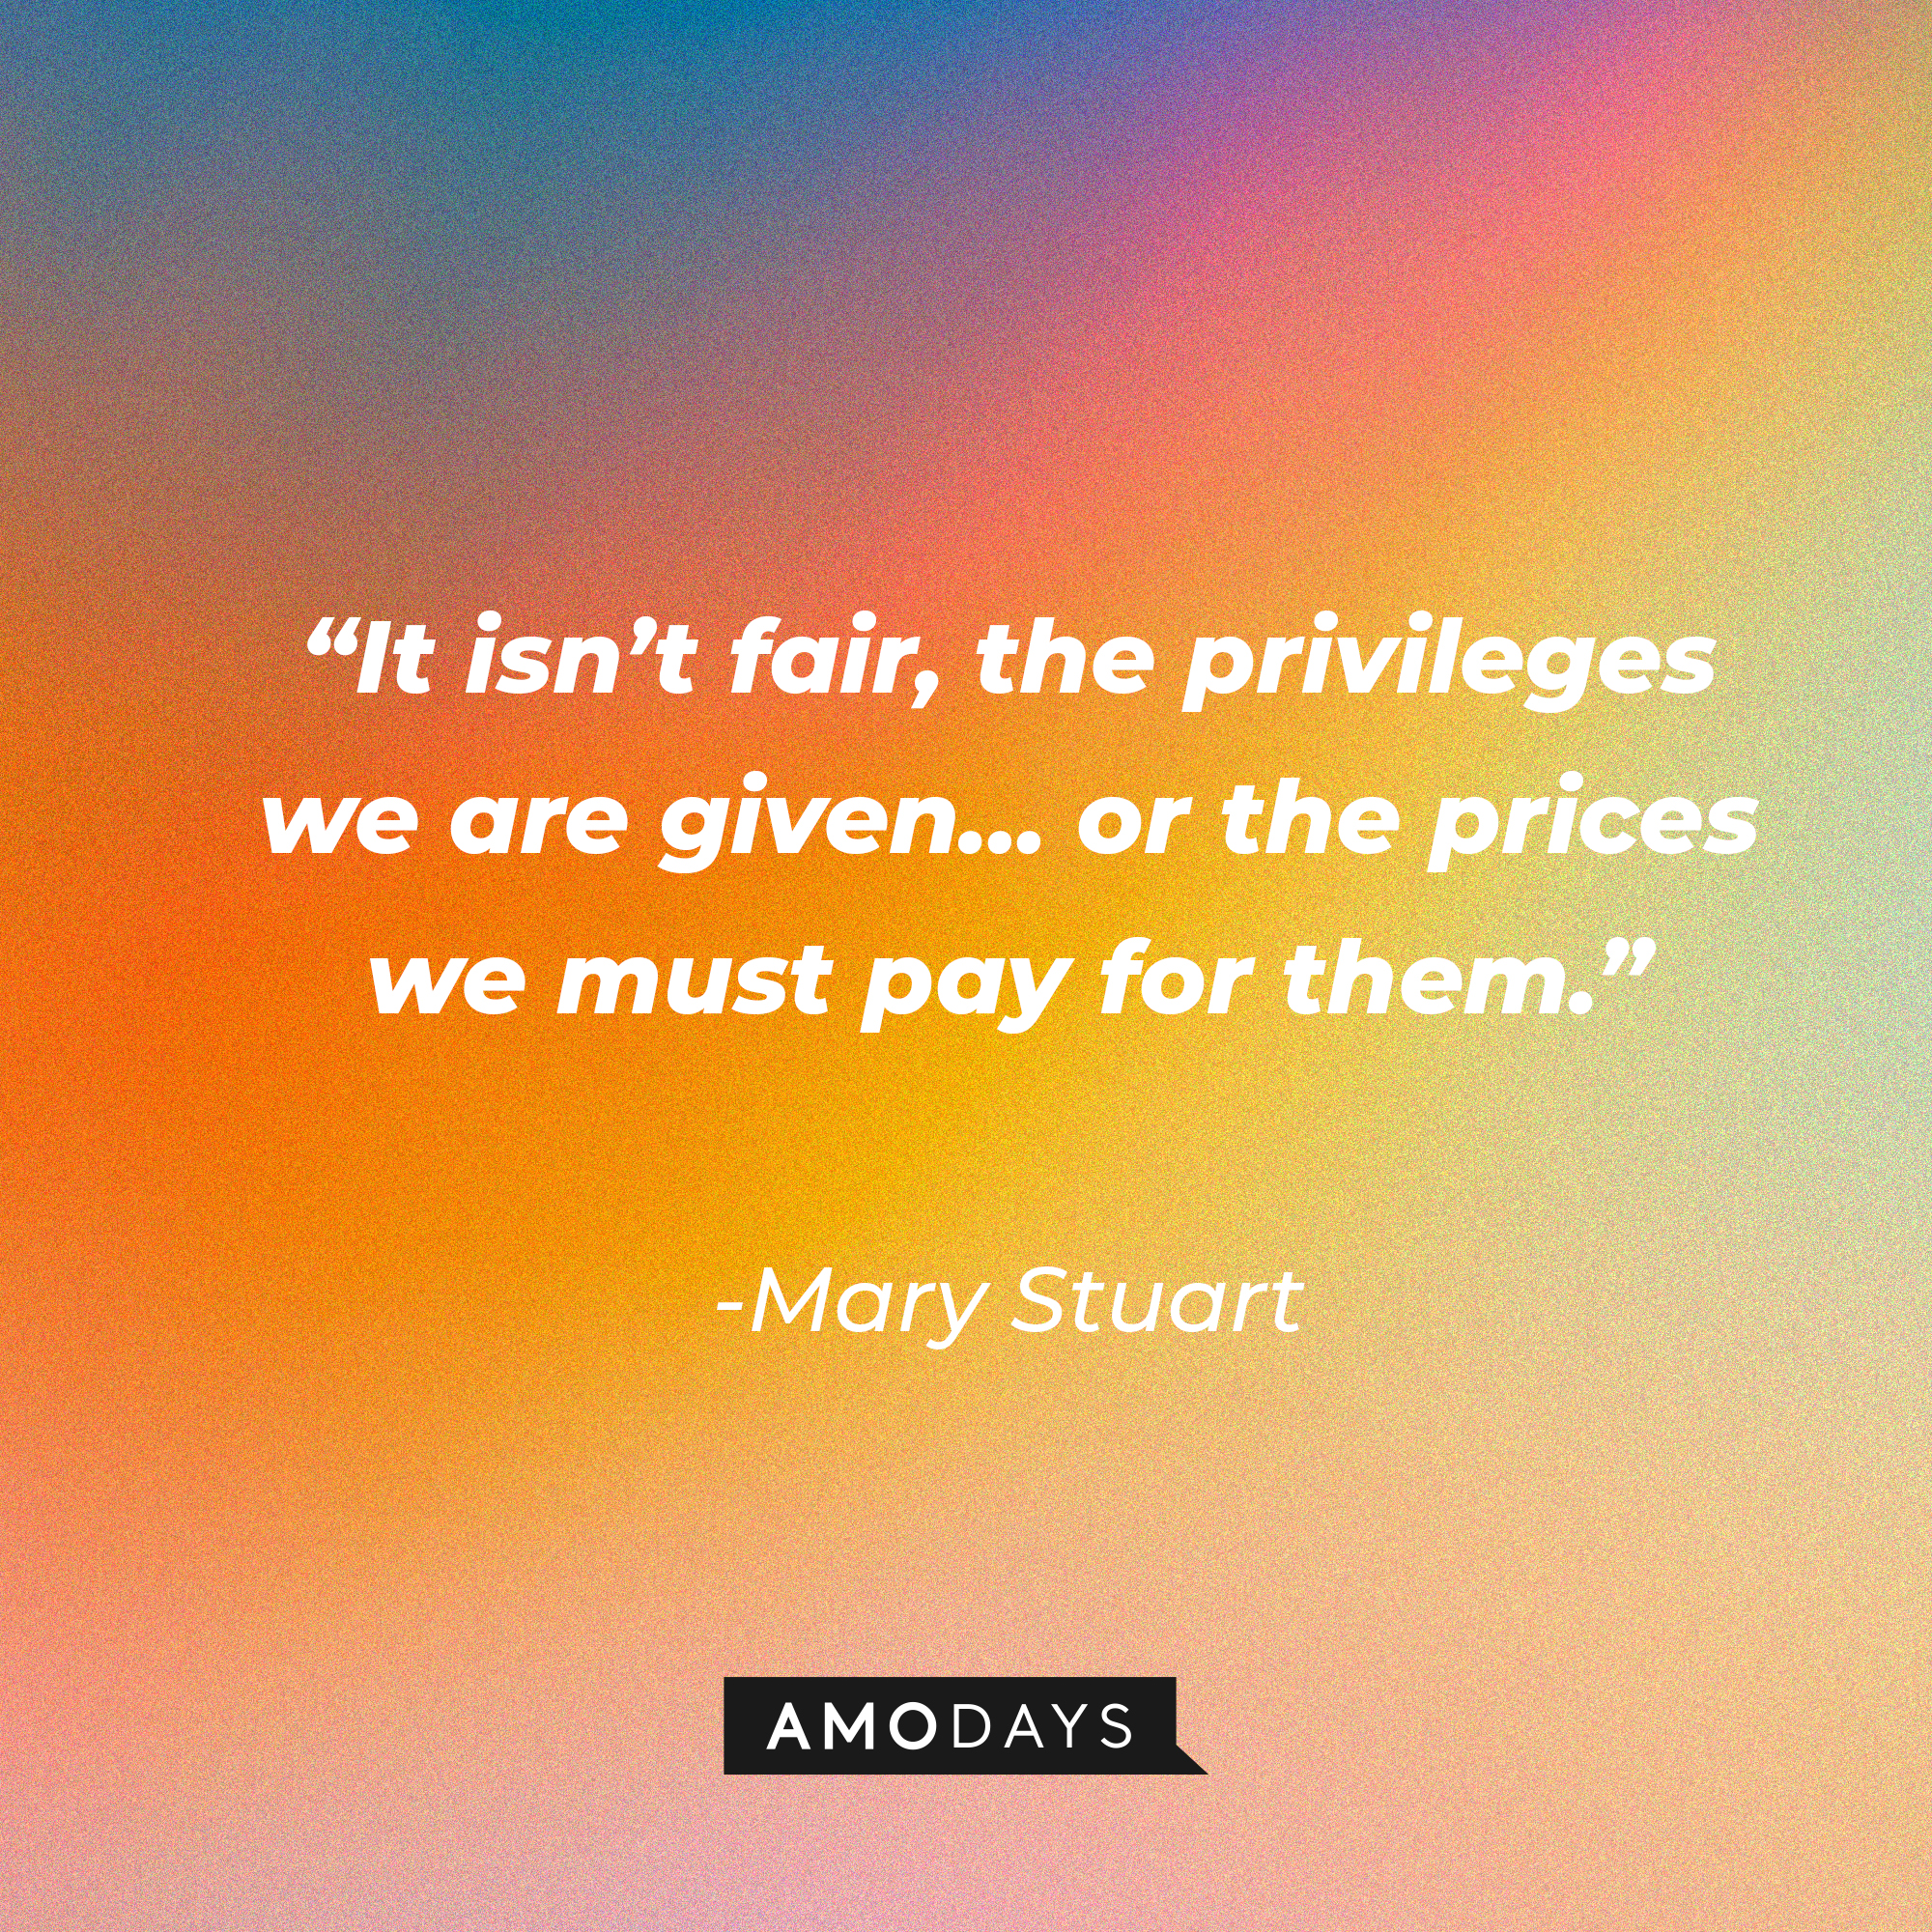 Mary Stuart's quote in "Reign:" “It isn’t fair, the privileges we are given… or the prices we must pay for them.” | Source: Amodays